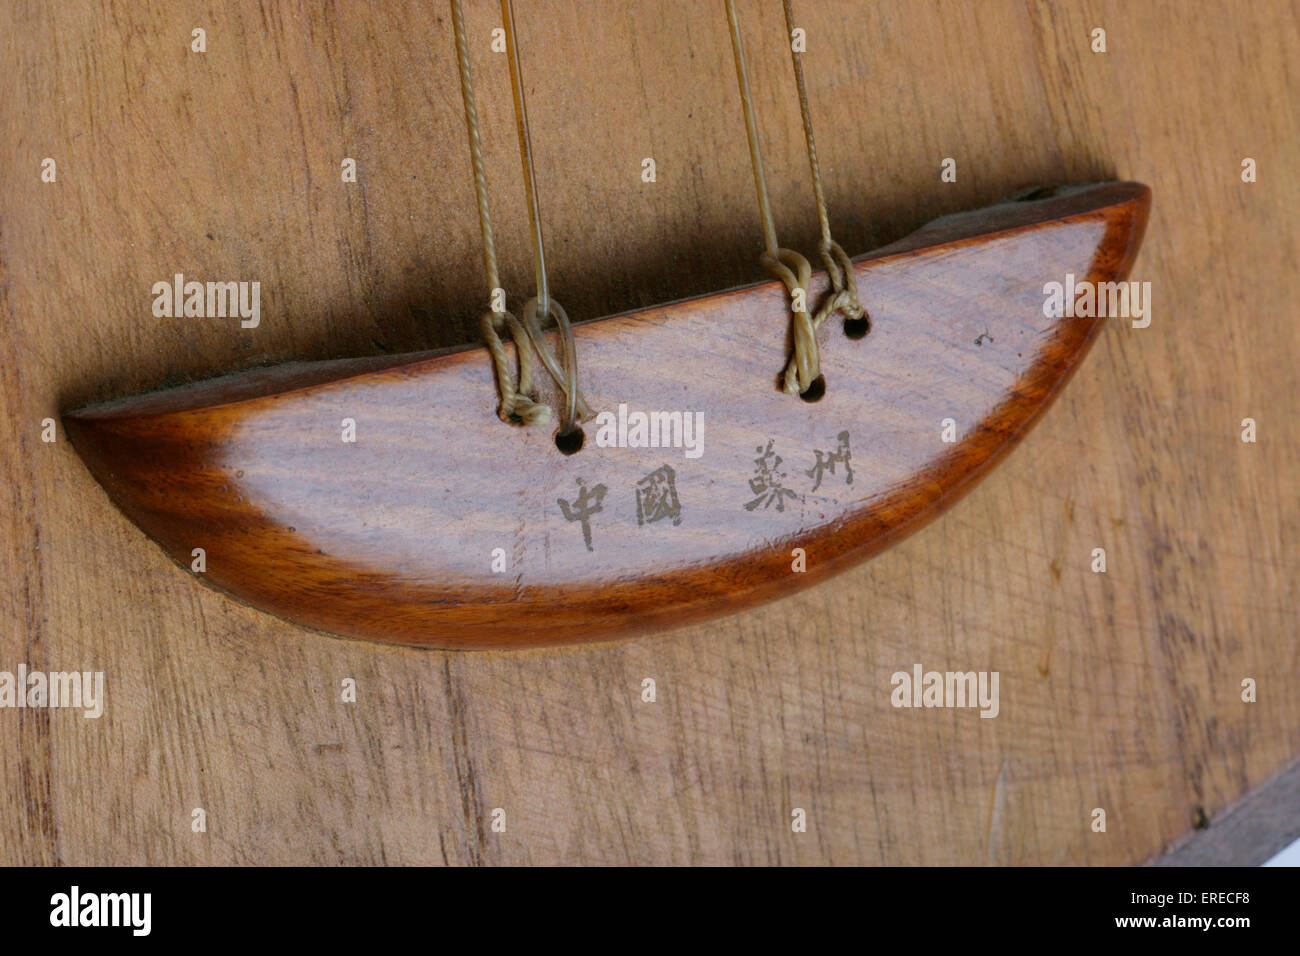 Chinese Moon shaped lute, or moon guitar. Yueh chin. Yueqin. Detail of tailpiece. Stock Photo